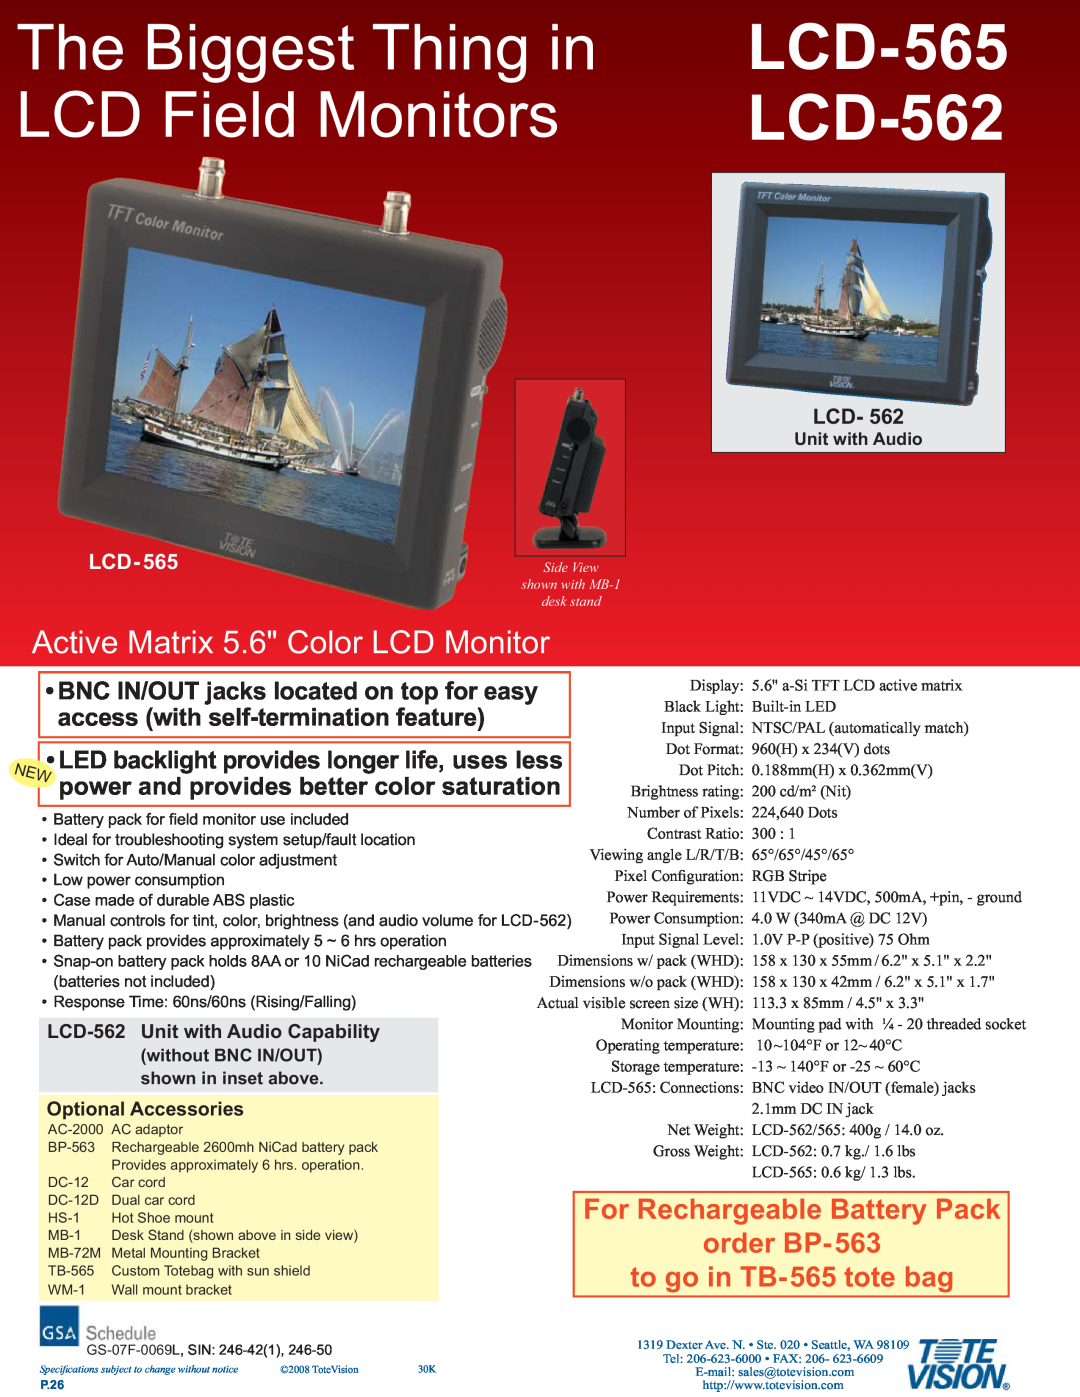 Tote Vision LCD-565 dimensions The Biggest Thing in, LCD Field Monitors, LCD-562, For Rechargeable Battery Pack 